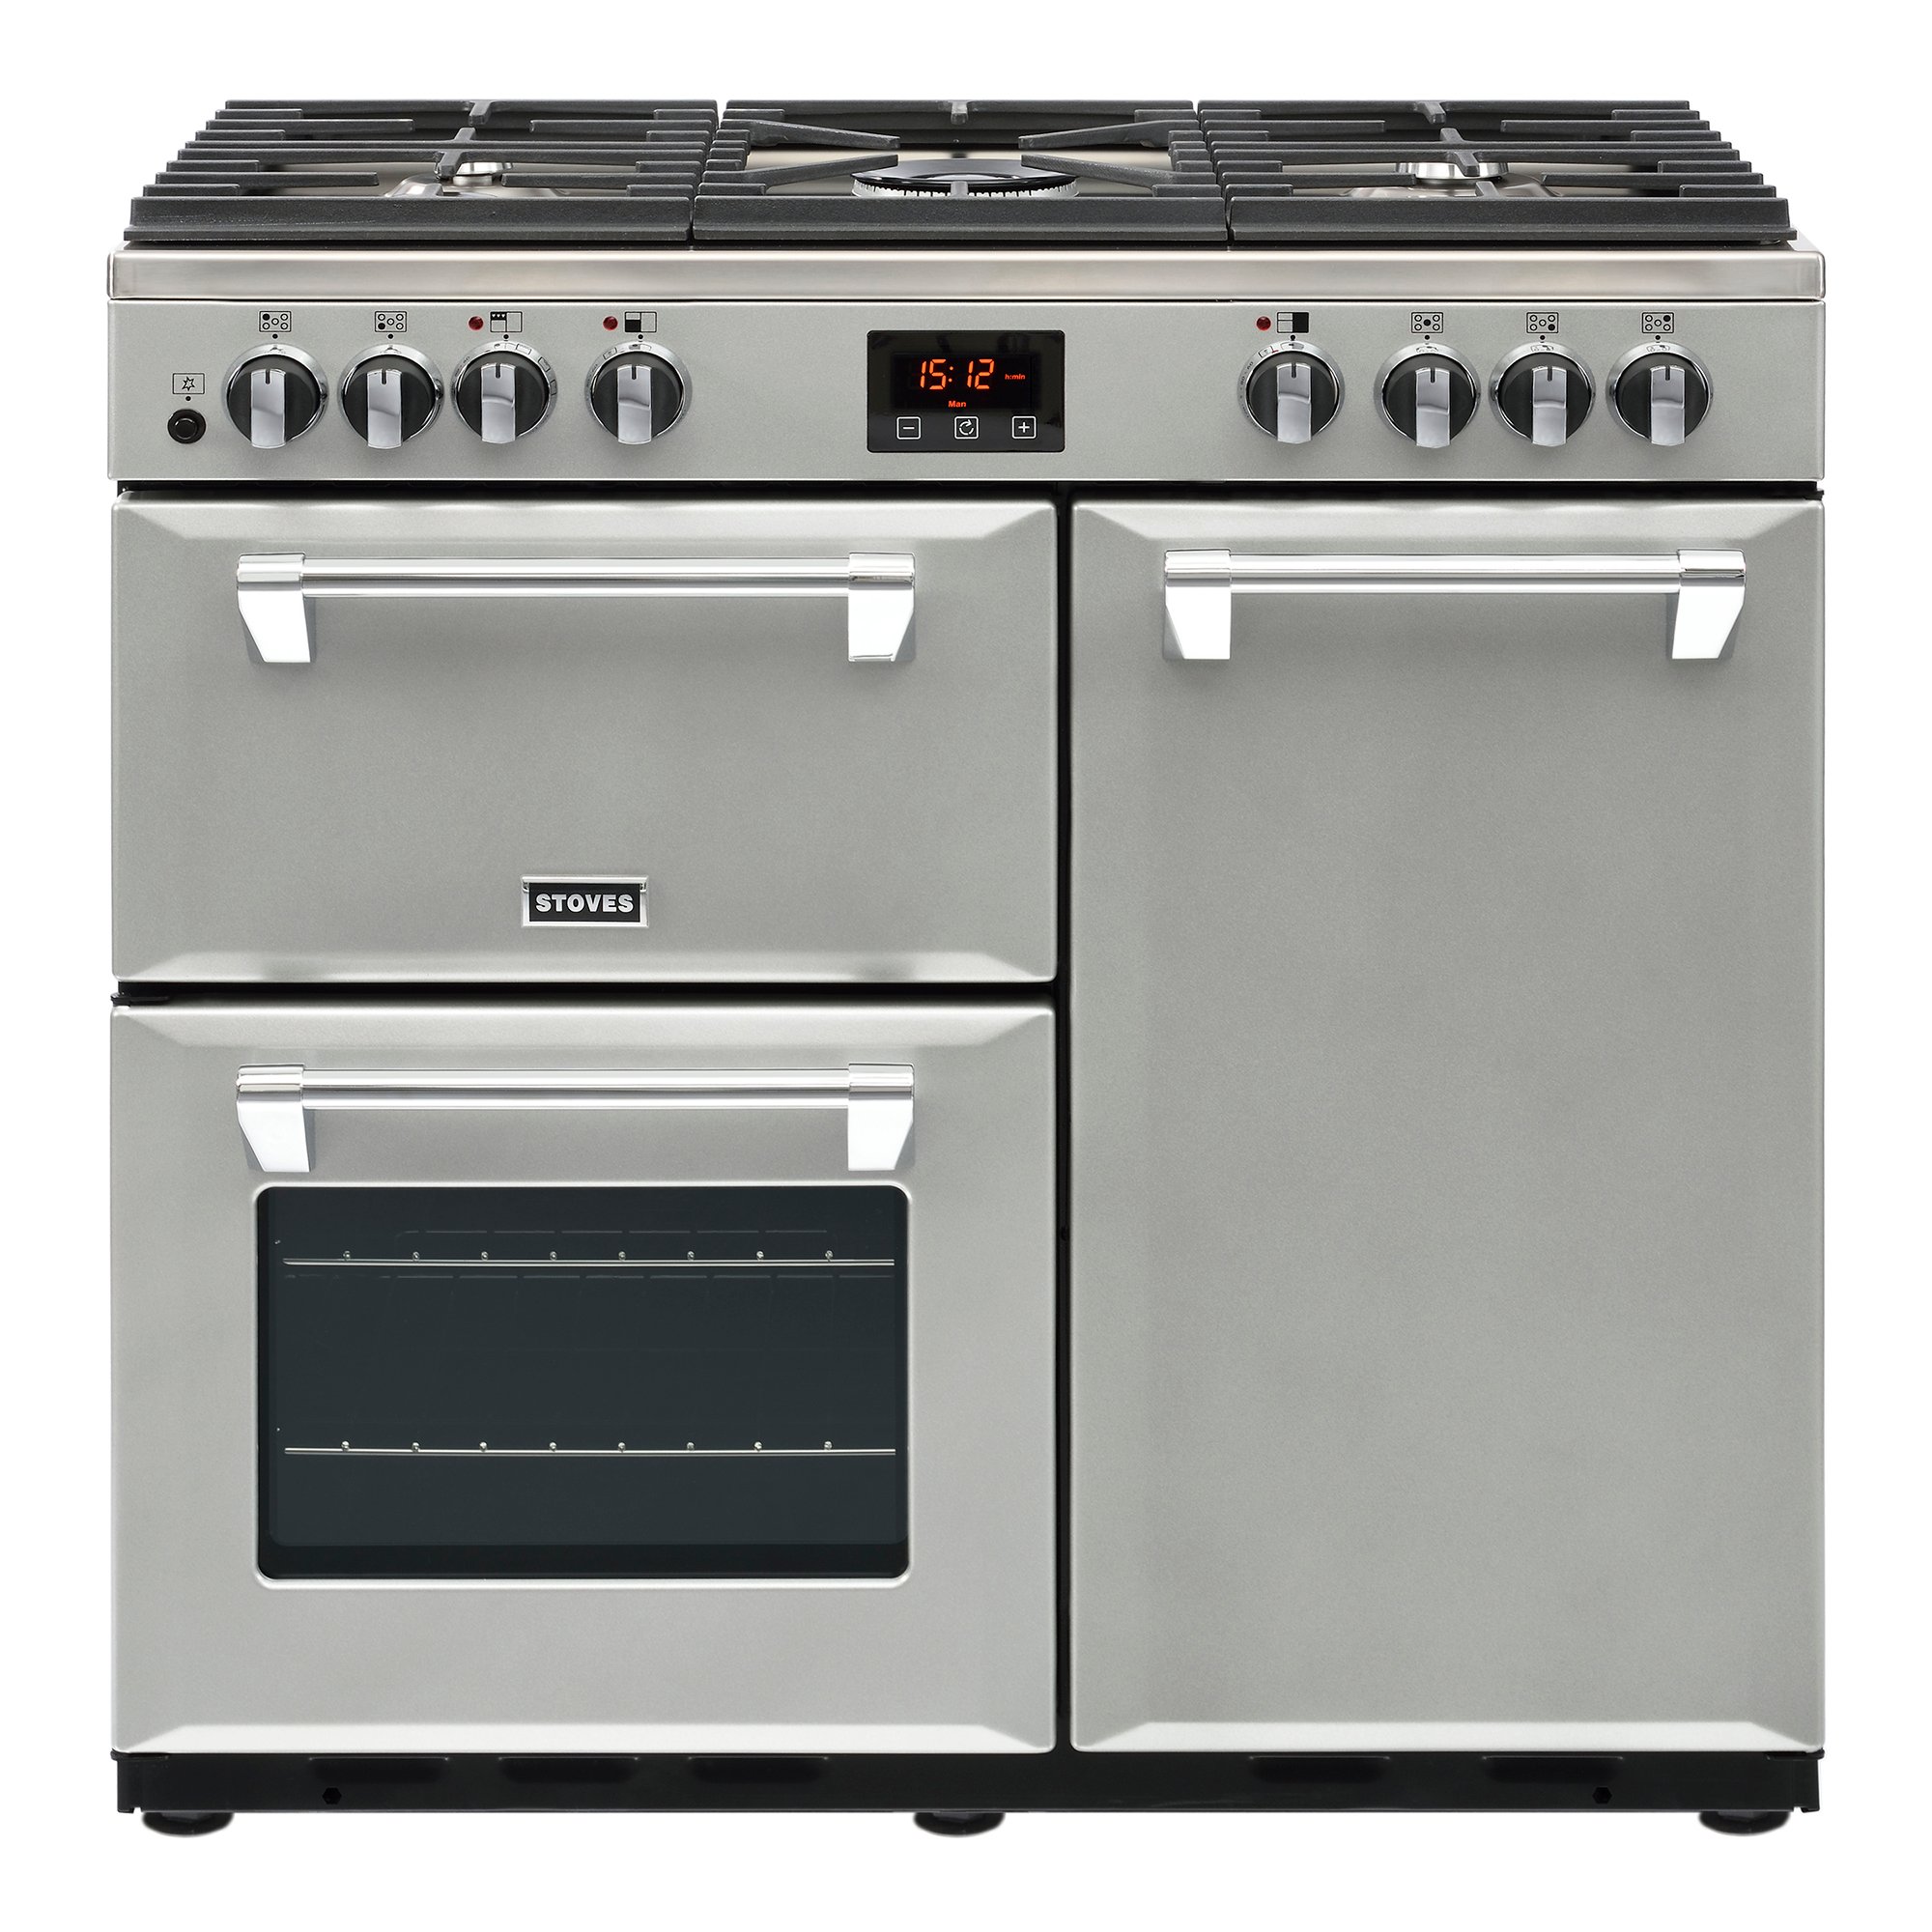 90cm dual fuel range cooker with cast iron supports, automatic ignition, market leading tall oven & easy clean enamel. A/A/A energy rating.